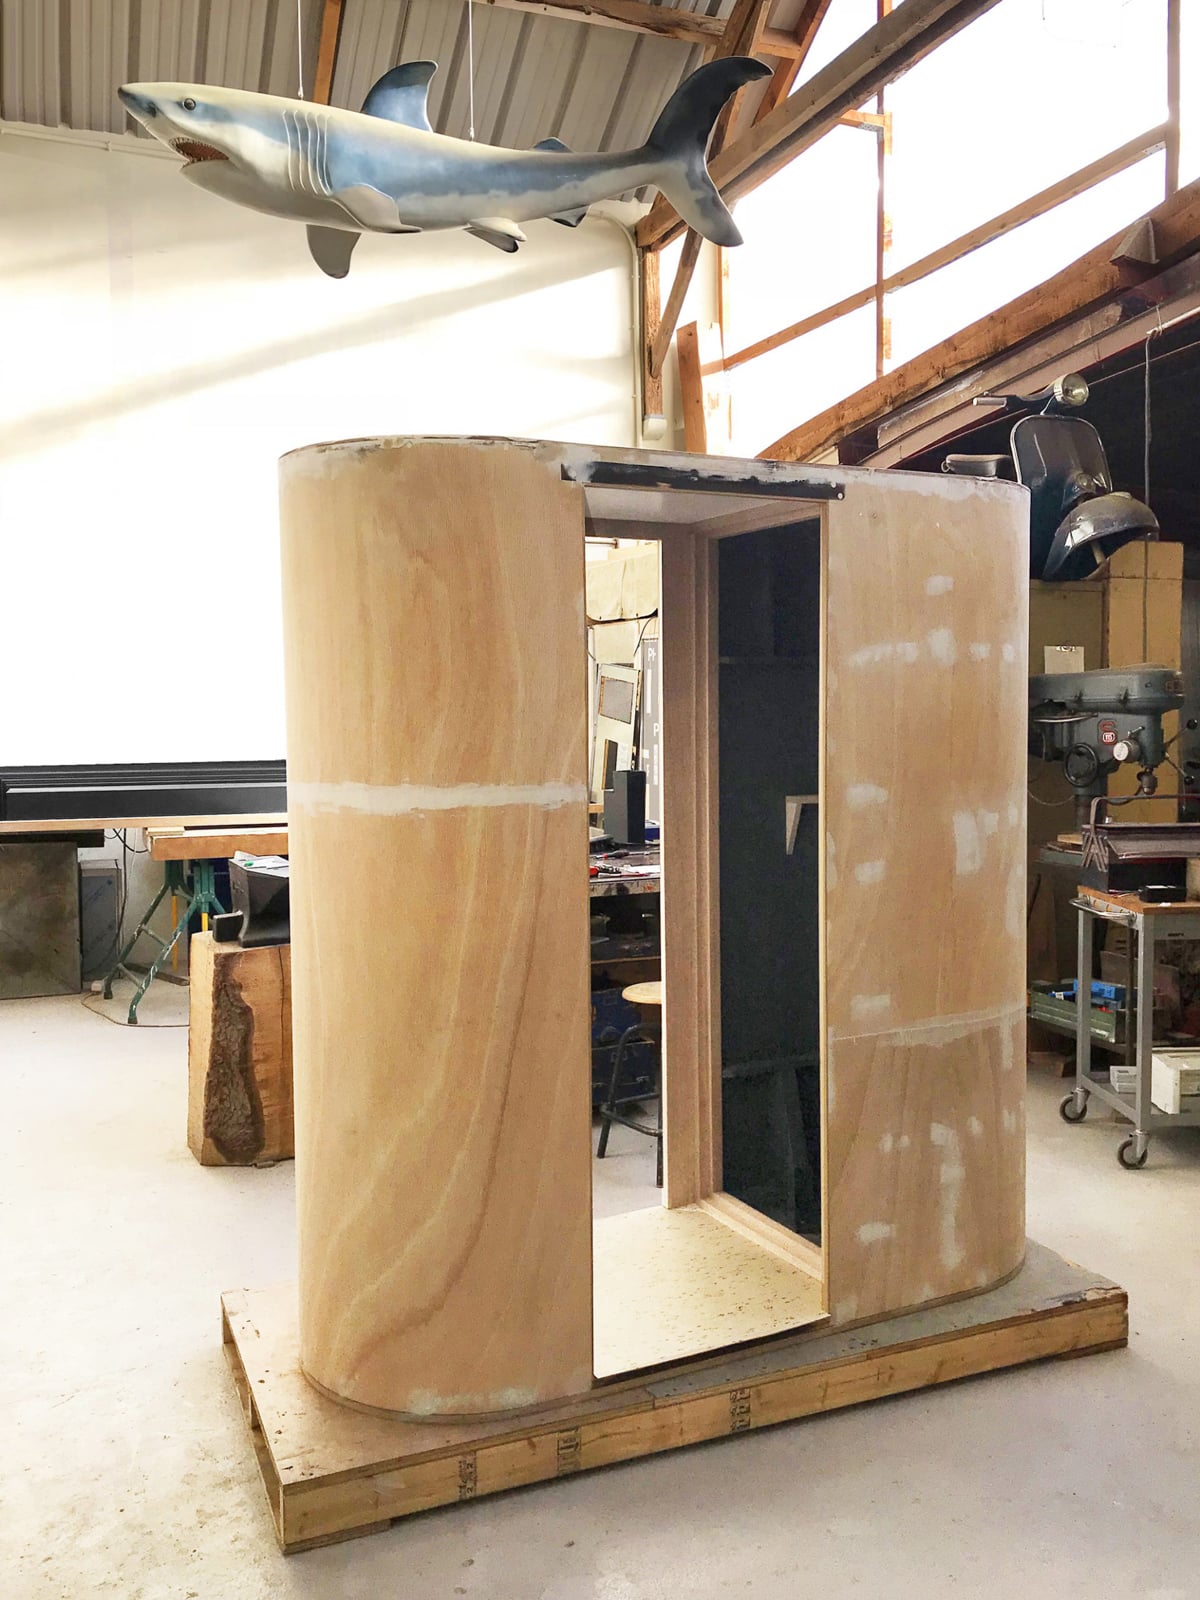 photo booth in progress in a workshop